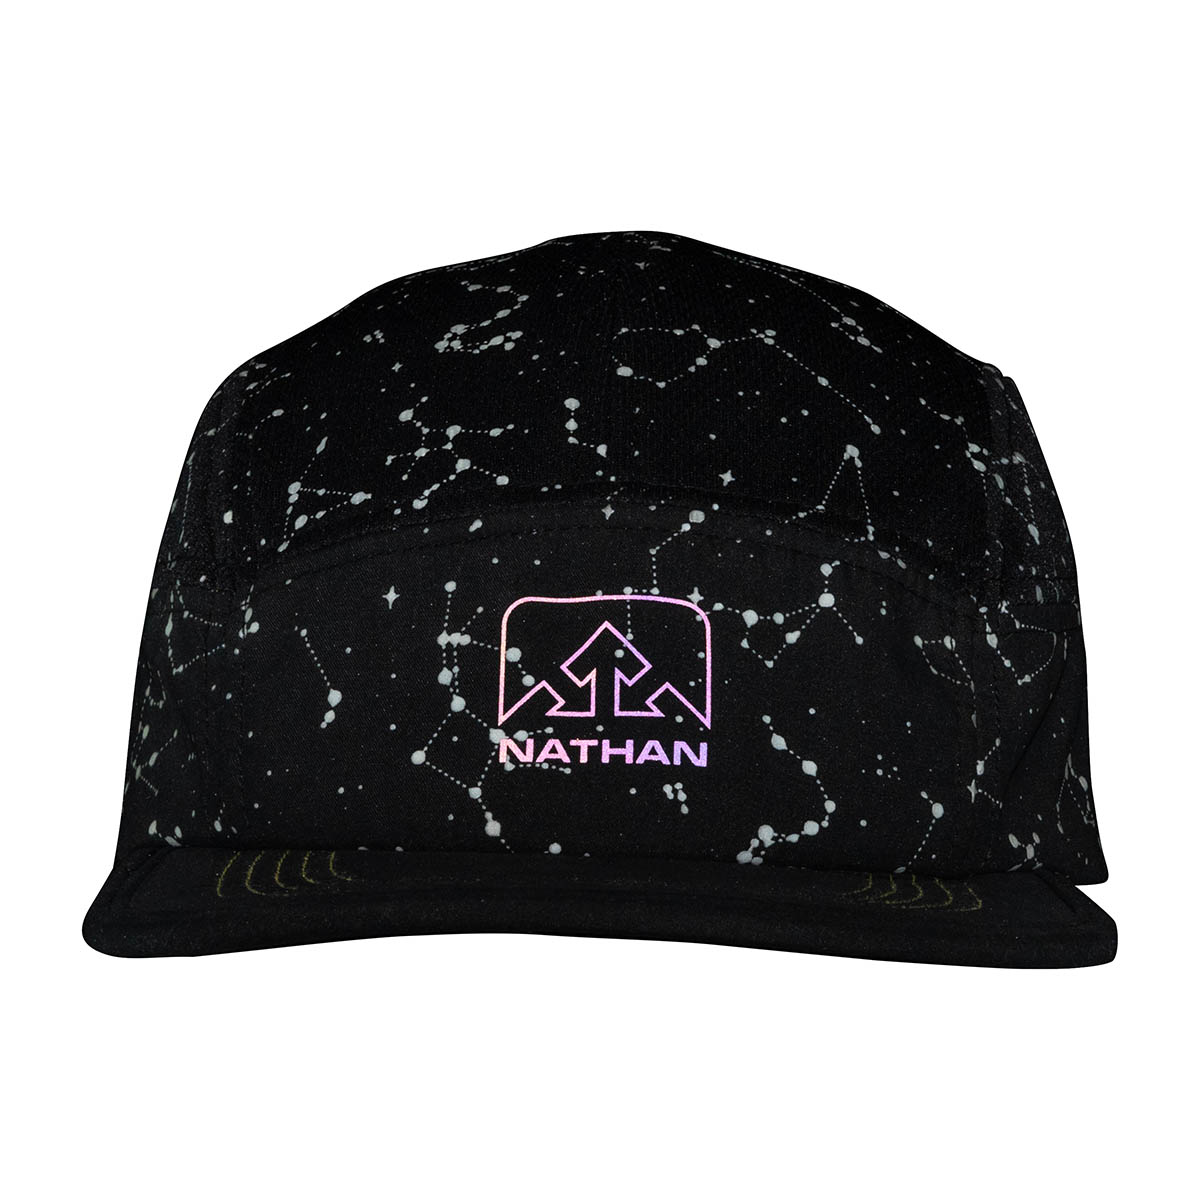 Nathan HyperNight Runner's Cap, , large image number null